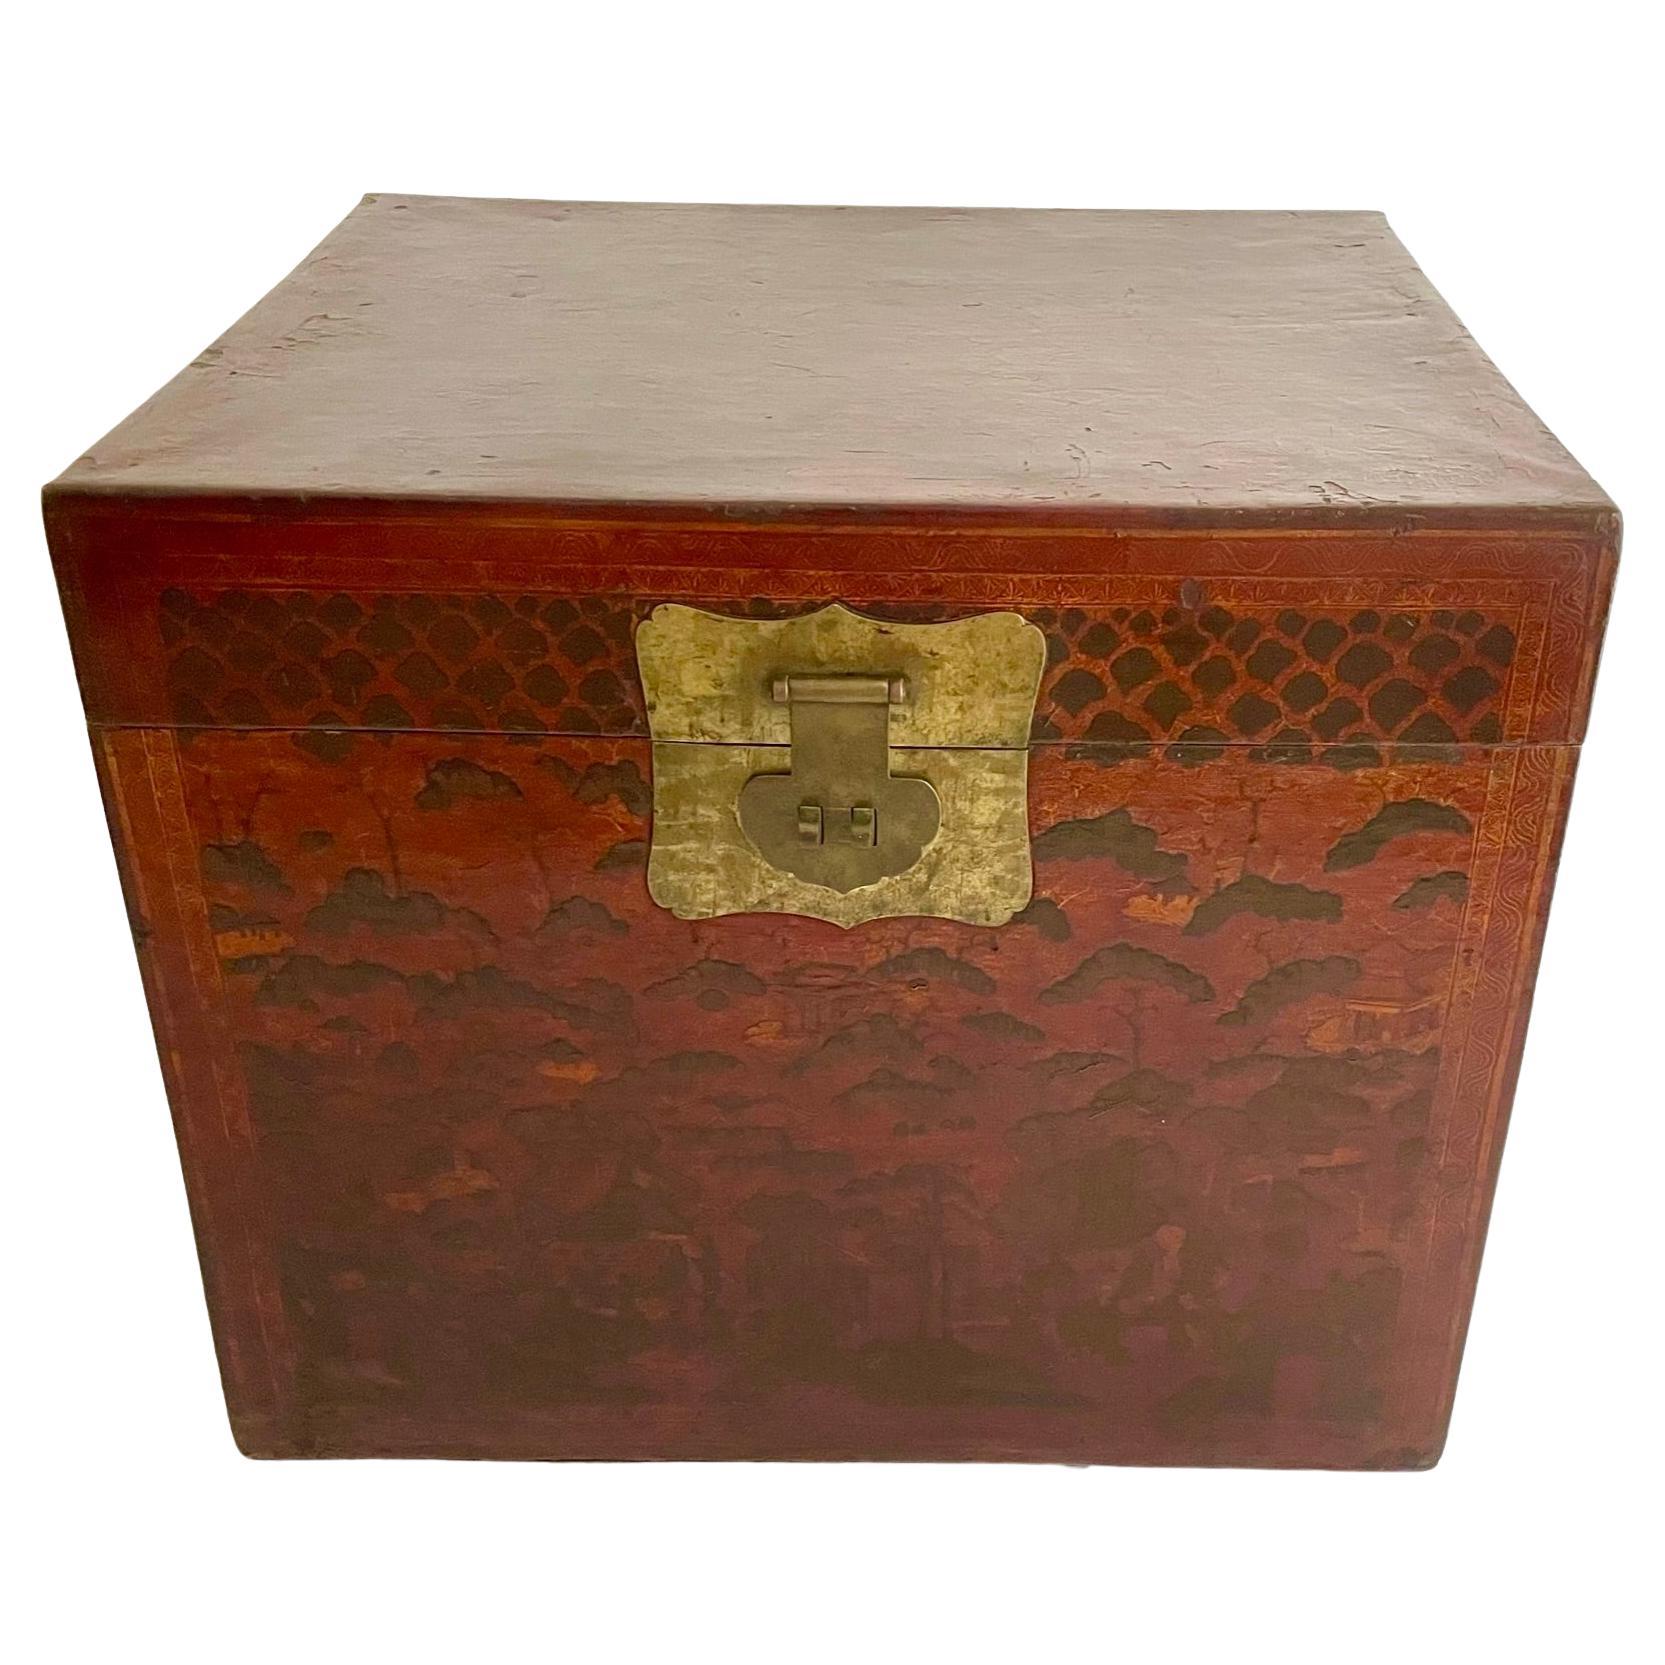 Rare Extra-Large 19th Century Chinese Painted Leather Trunk